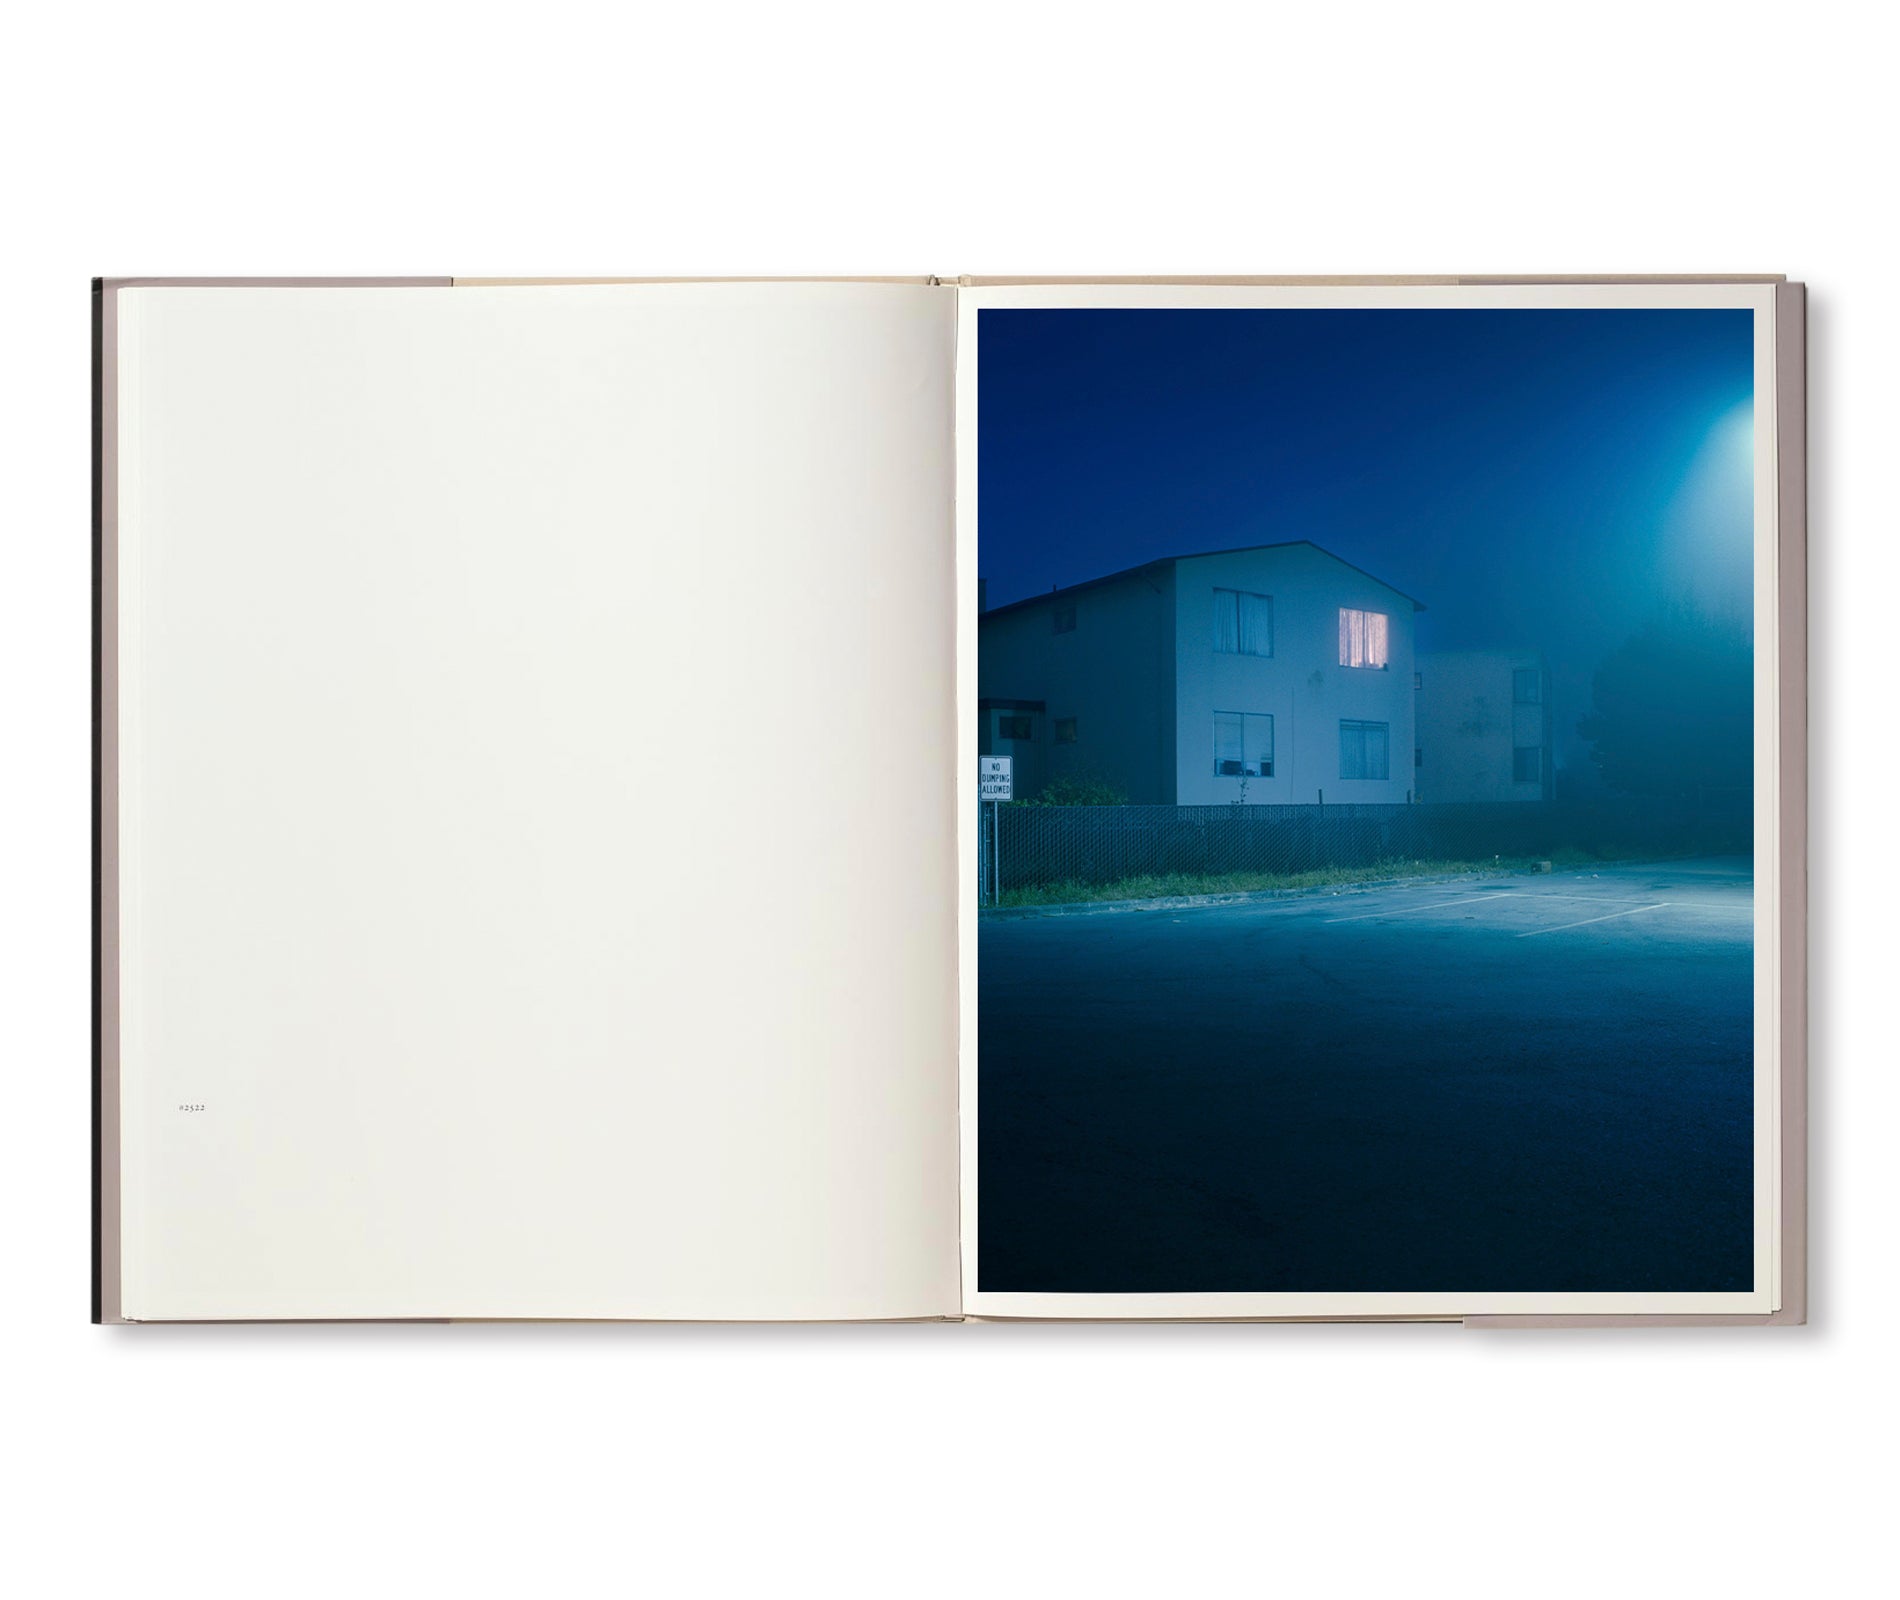 OUTSKIRTS by Todd Hido [DELUXE EDITION]